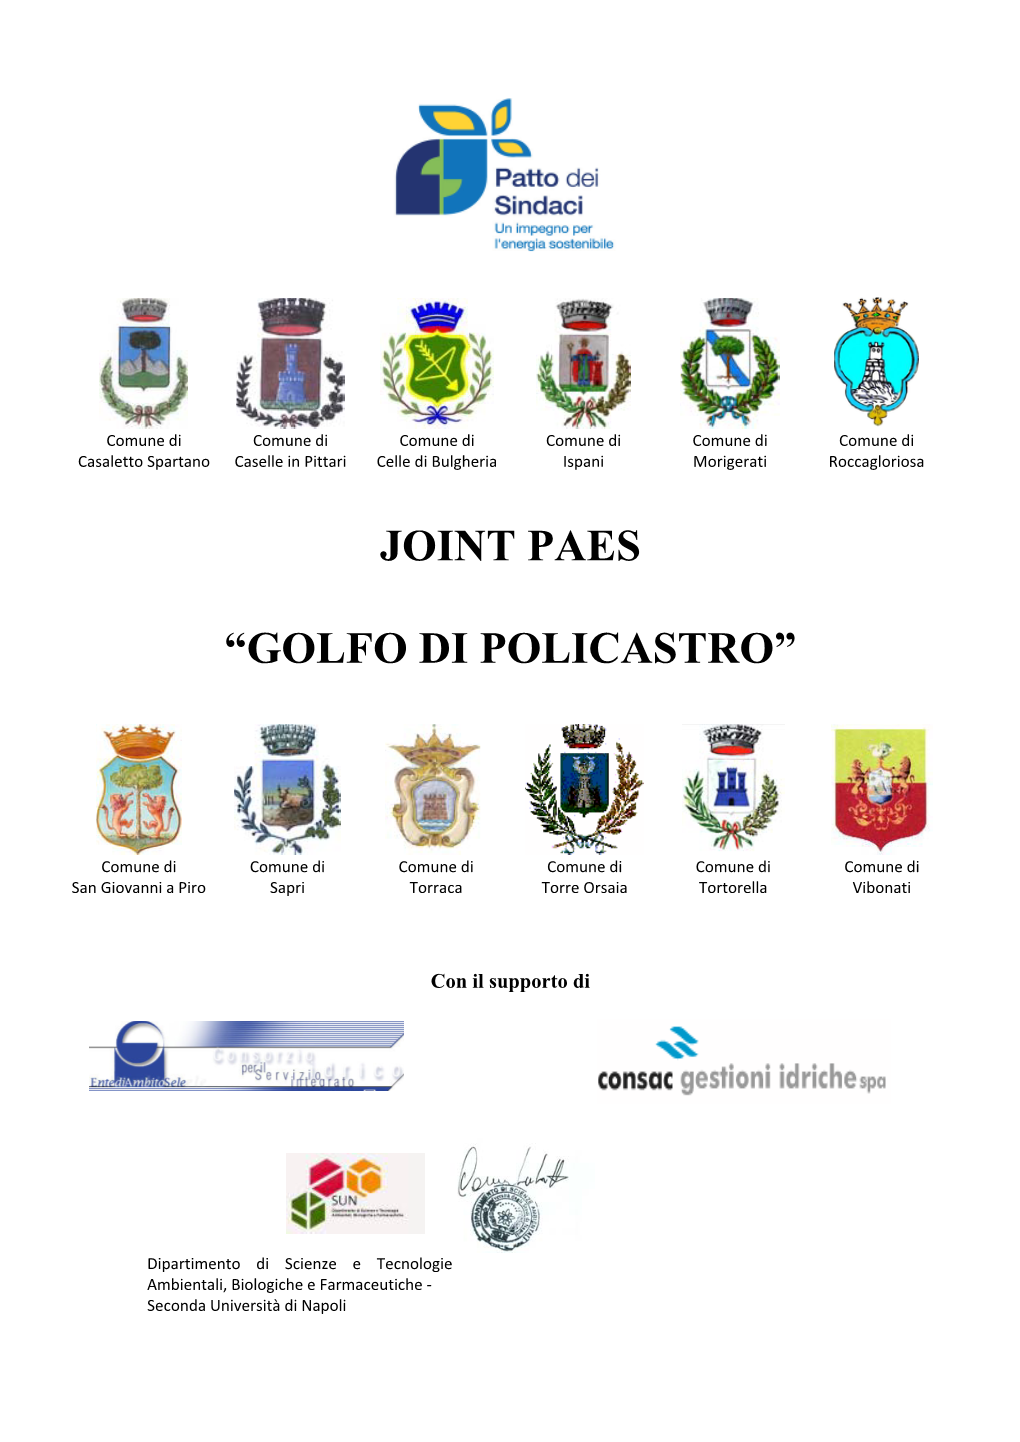 JOINT PAES “Golfo Di Policastro”